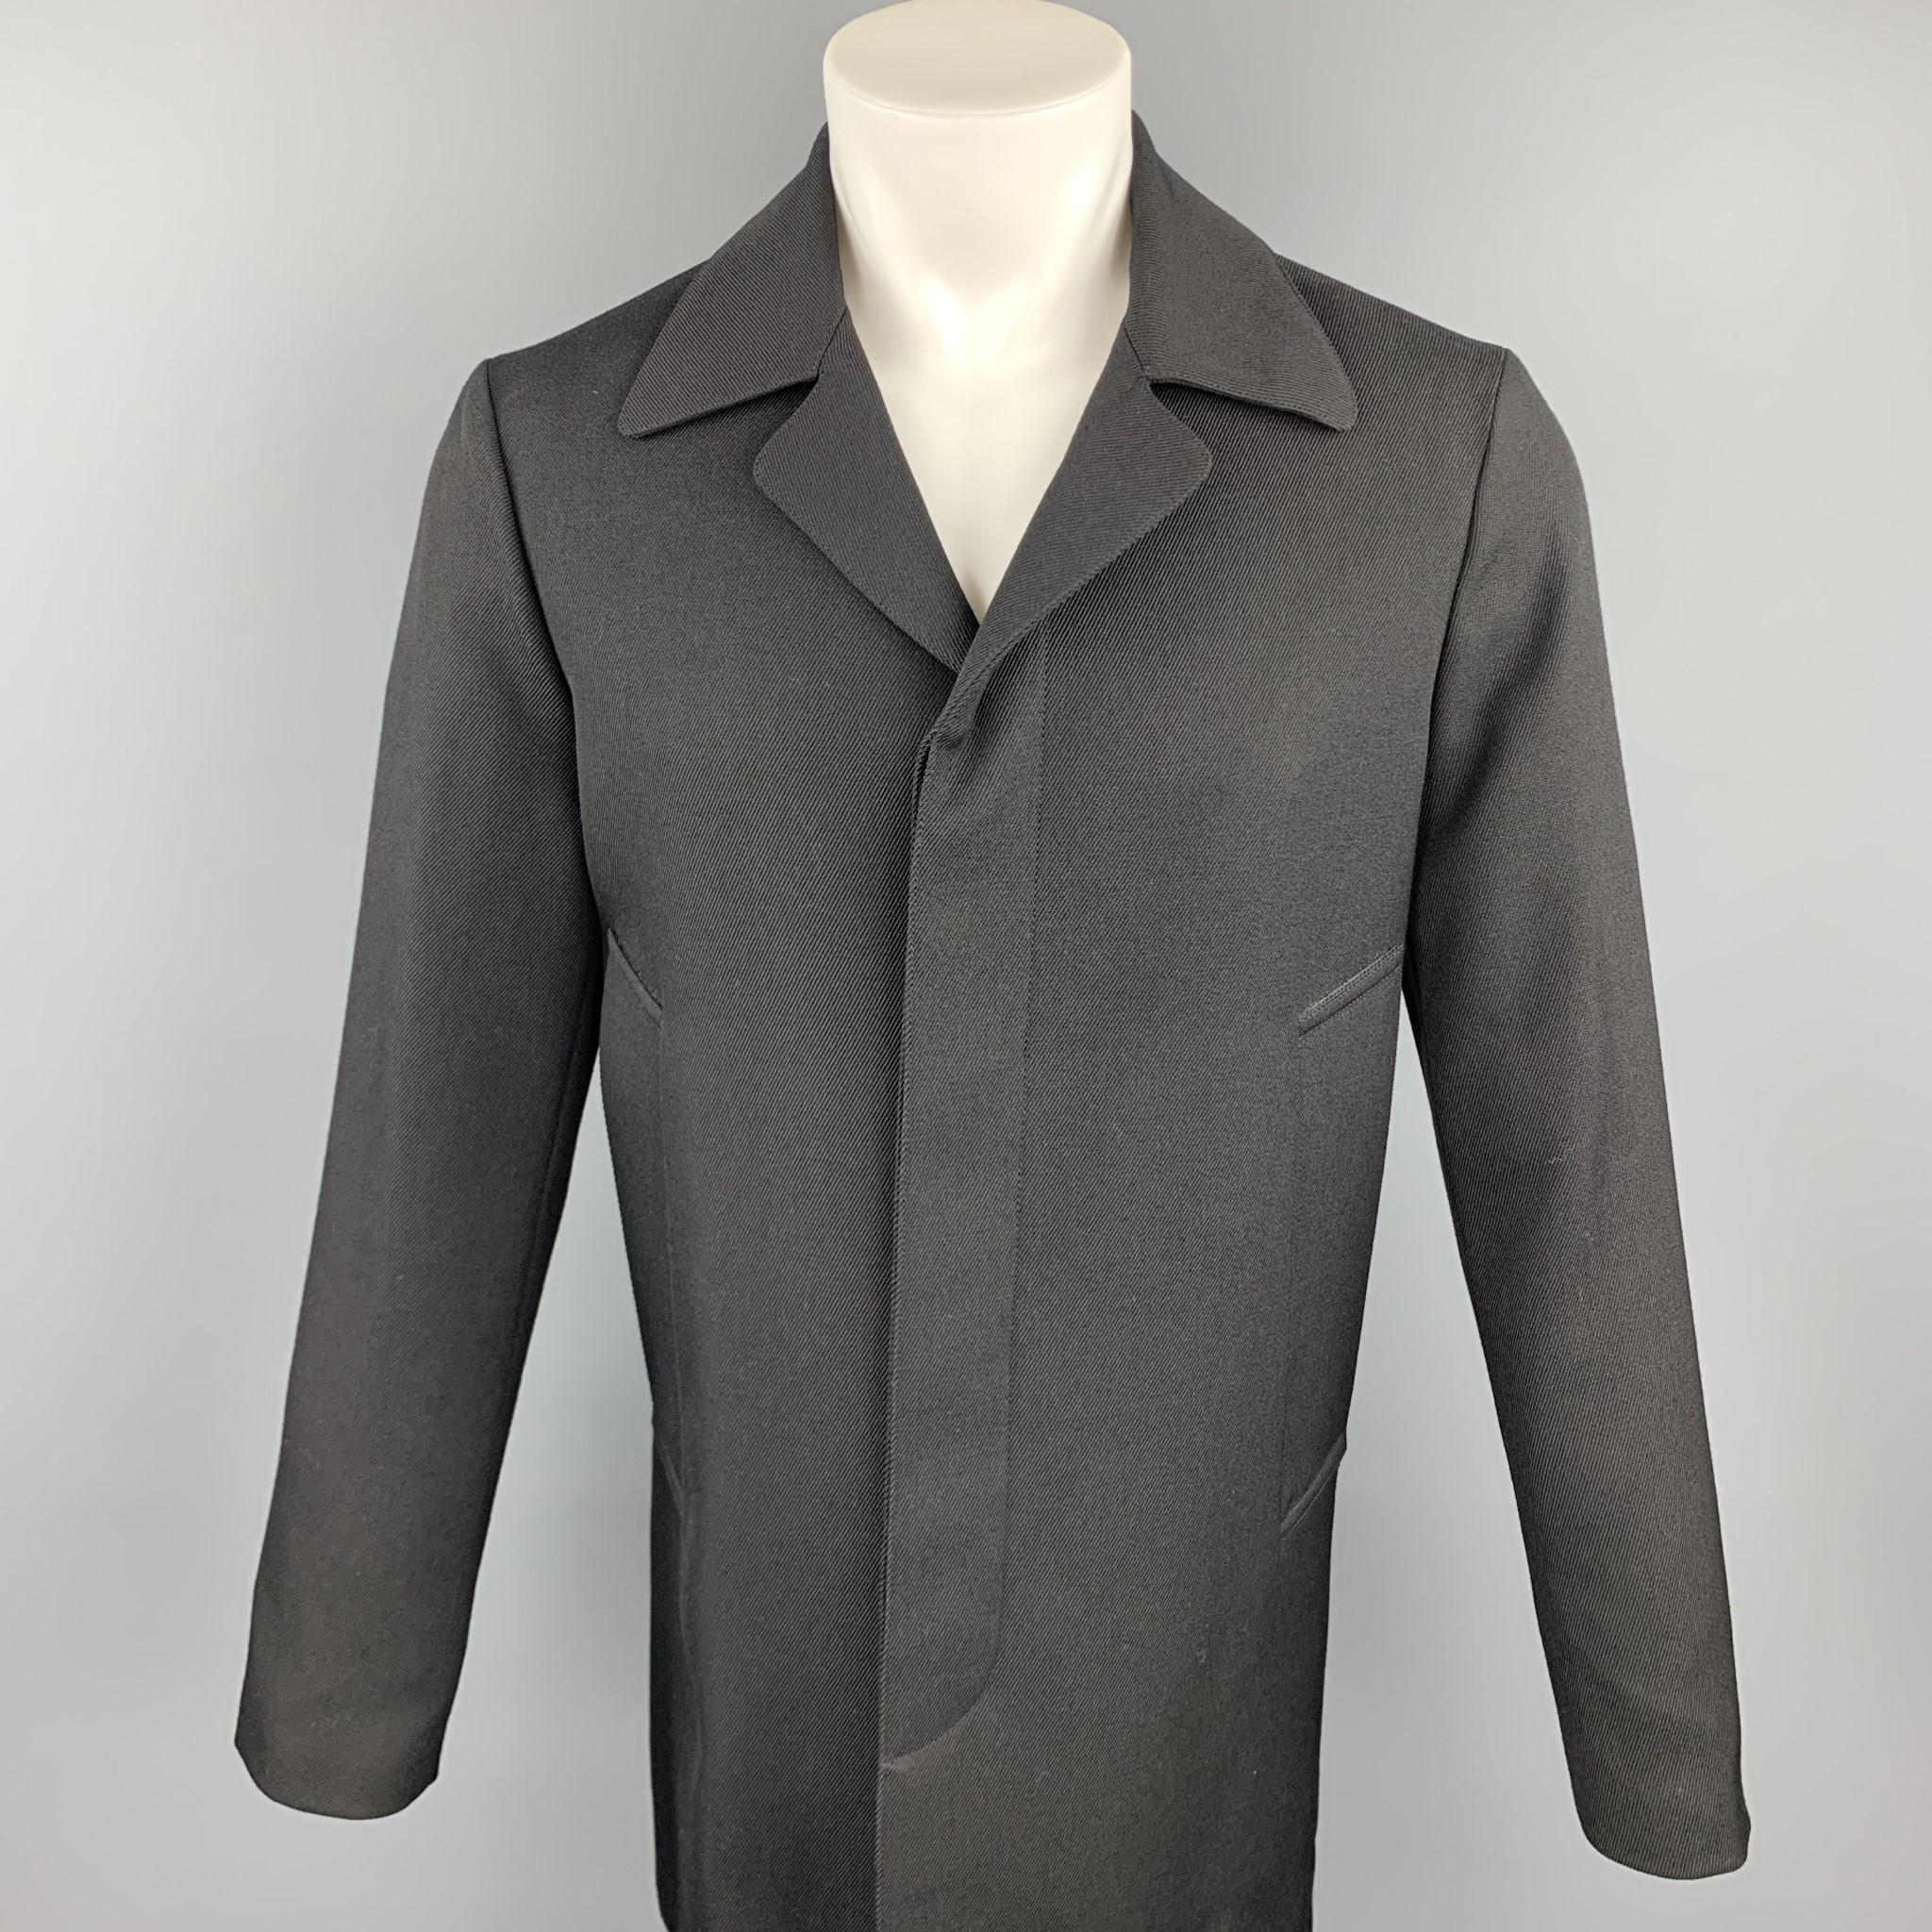 MARNI coat comes in a black wool featuring a notch lapel style, slit pockets, and a hidden button closure. Made in Italy.

Excellent Pre-Owned Condition.
Marked: IT 44

Measurements:

Shoulder: 17 in. 
Chest: 42 in.
Sleeve: 27 in.
Length: 35.5 in. 